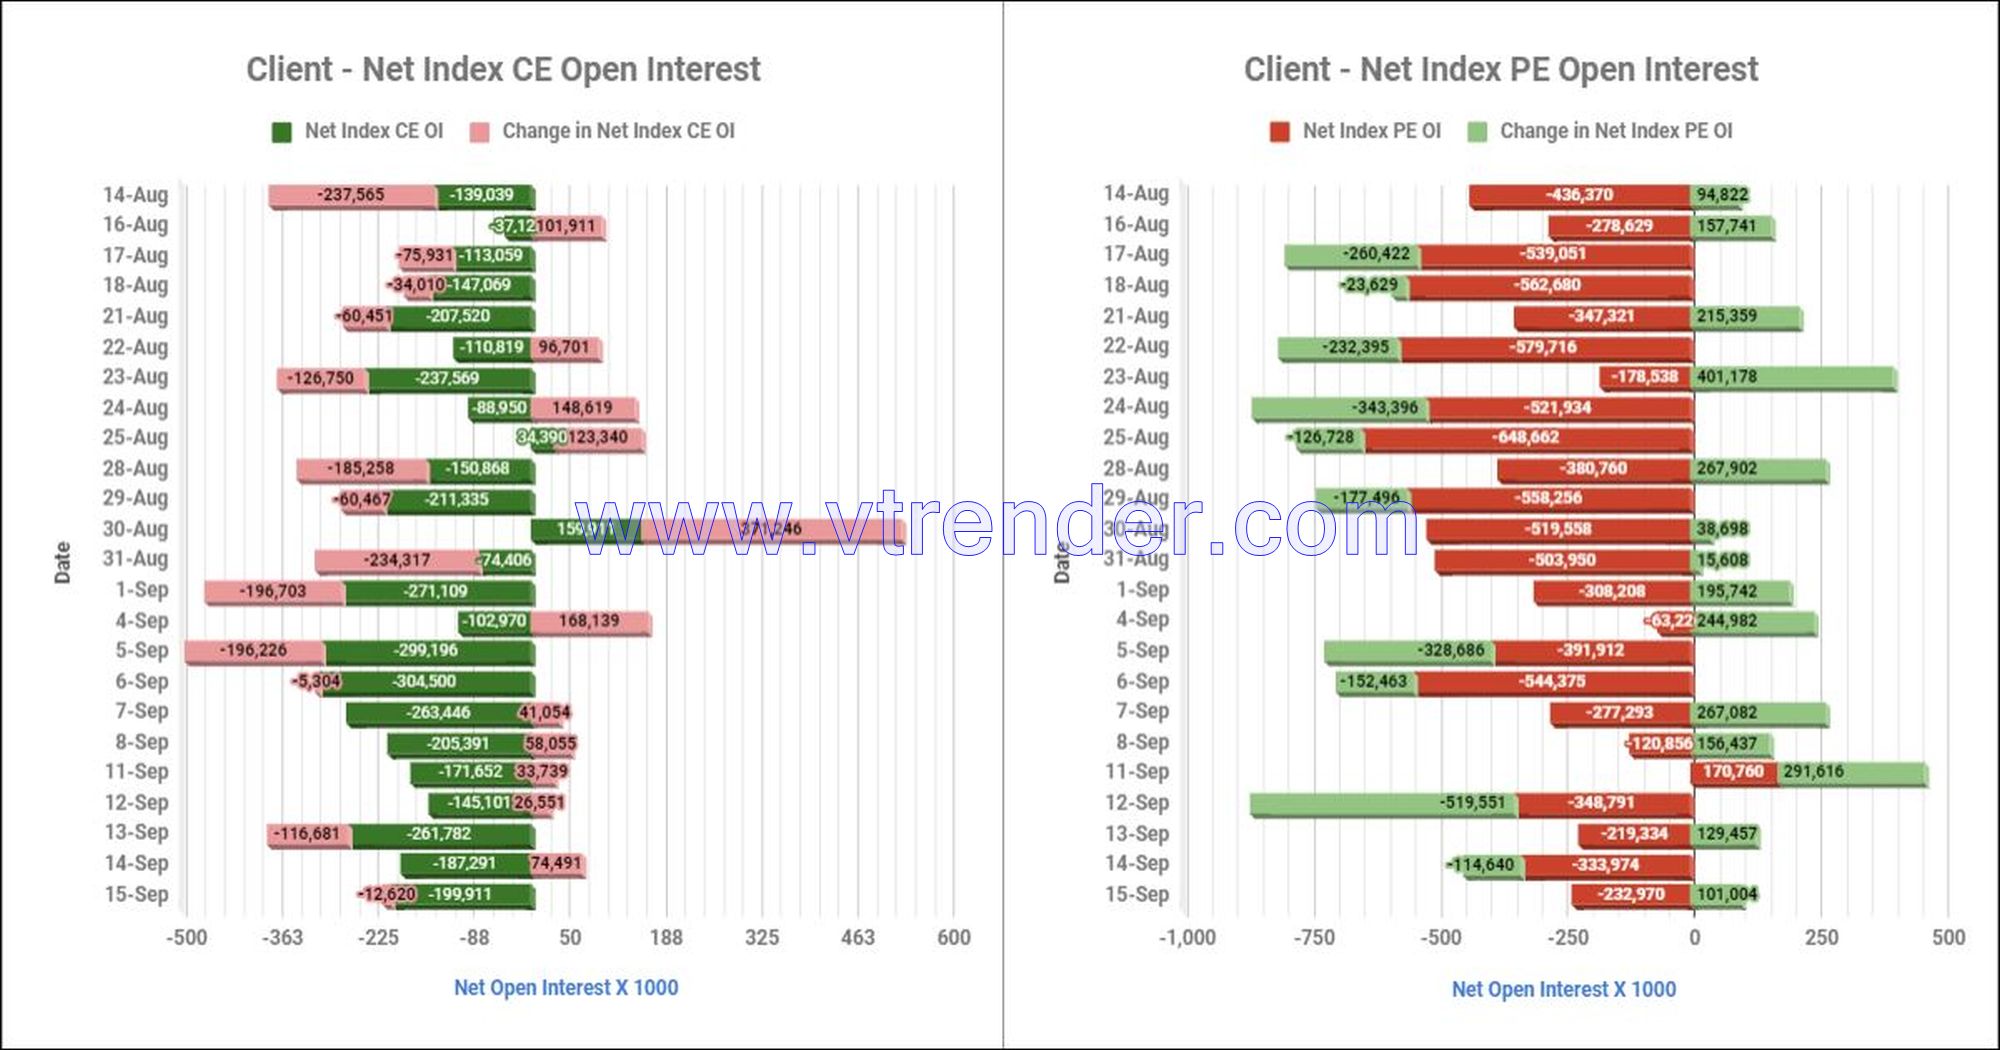 Clientinop15Sep Participantwise Net Open Interest And Net Equity Investments – 15Th Sep 2023 Ce, Client, Dii, Fii, Index Futures, Index Options, Open Interest, Pe, Prop, Stocks Futures